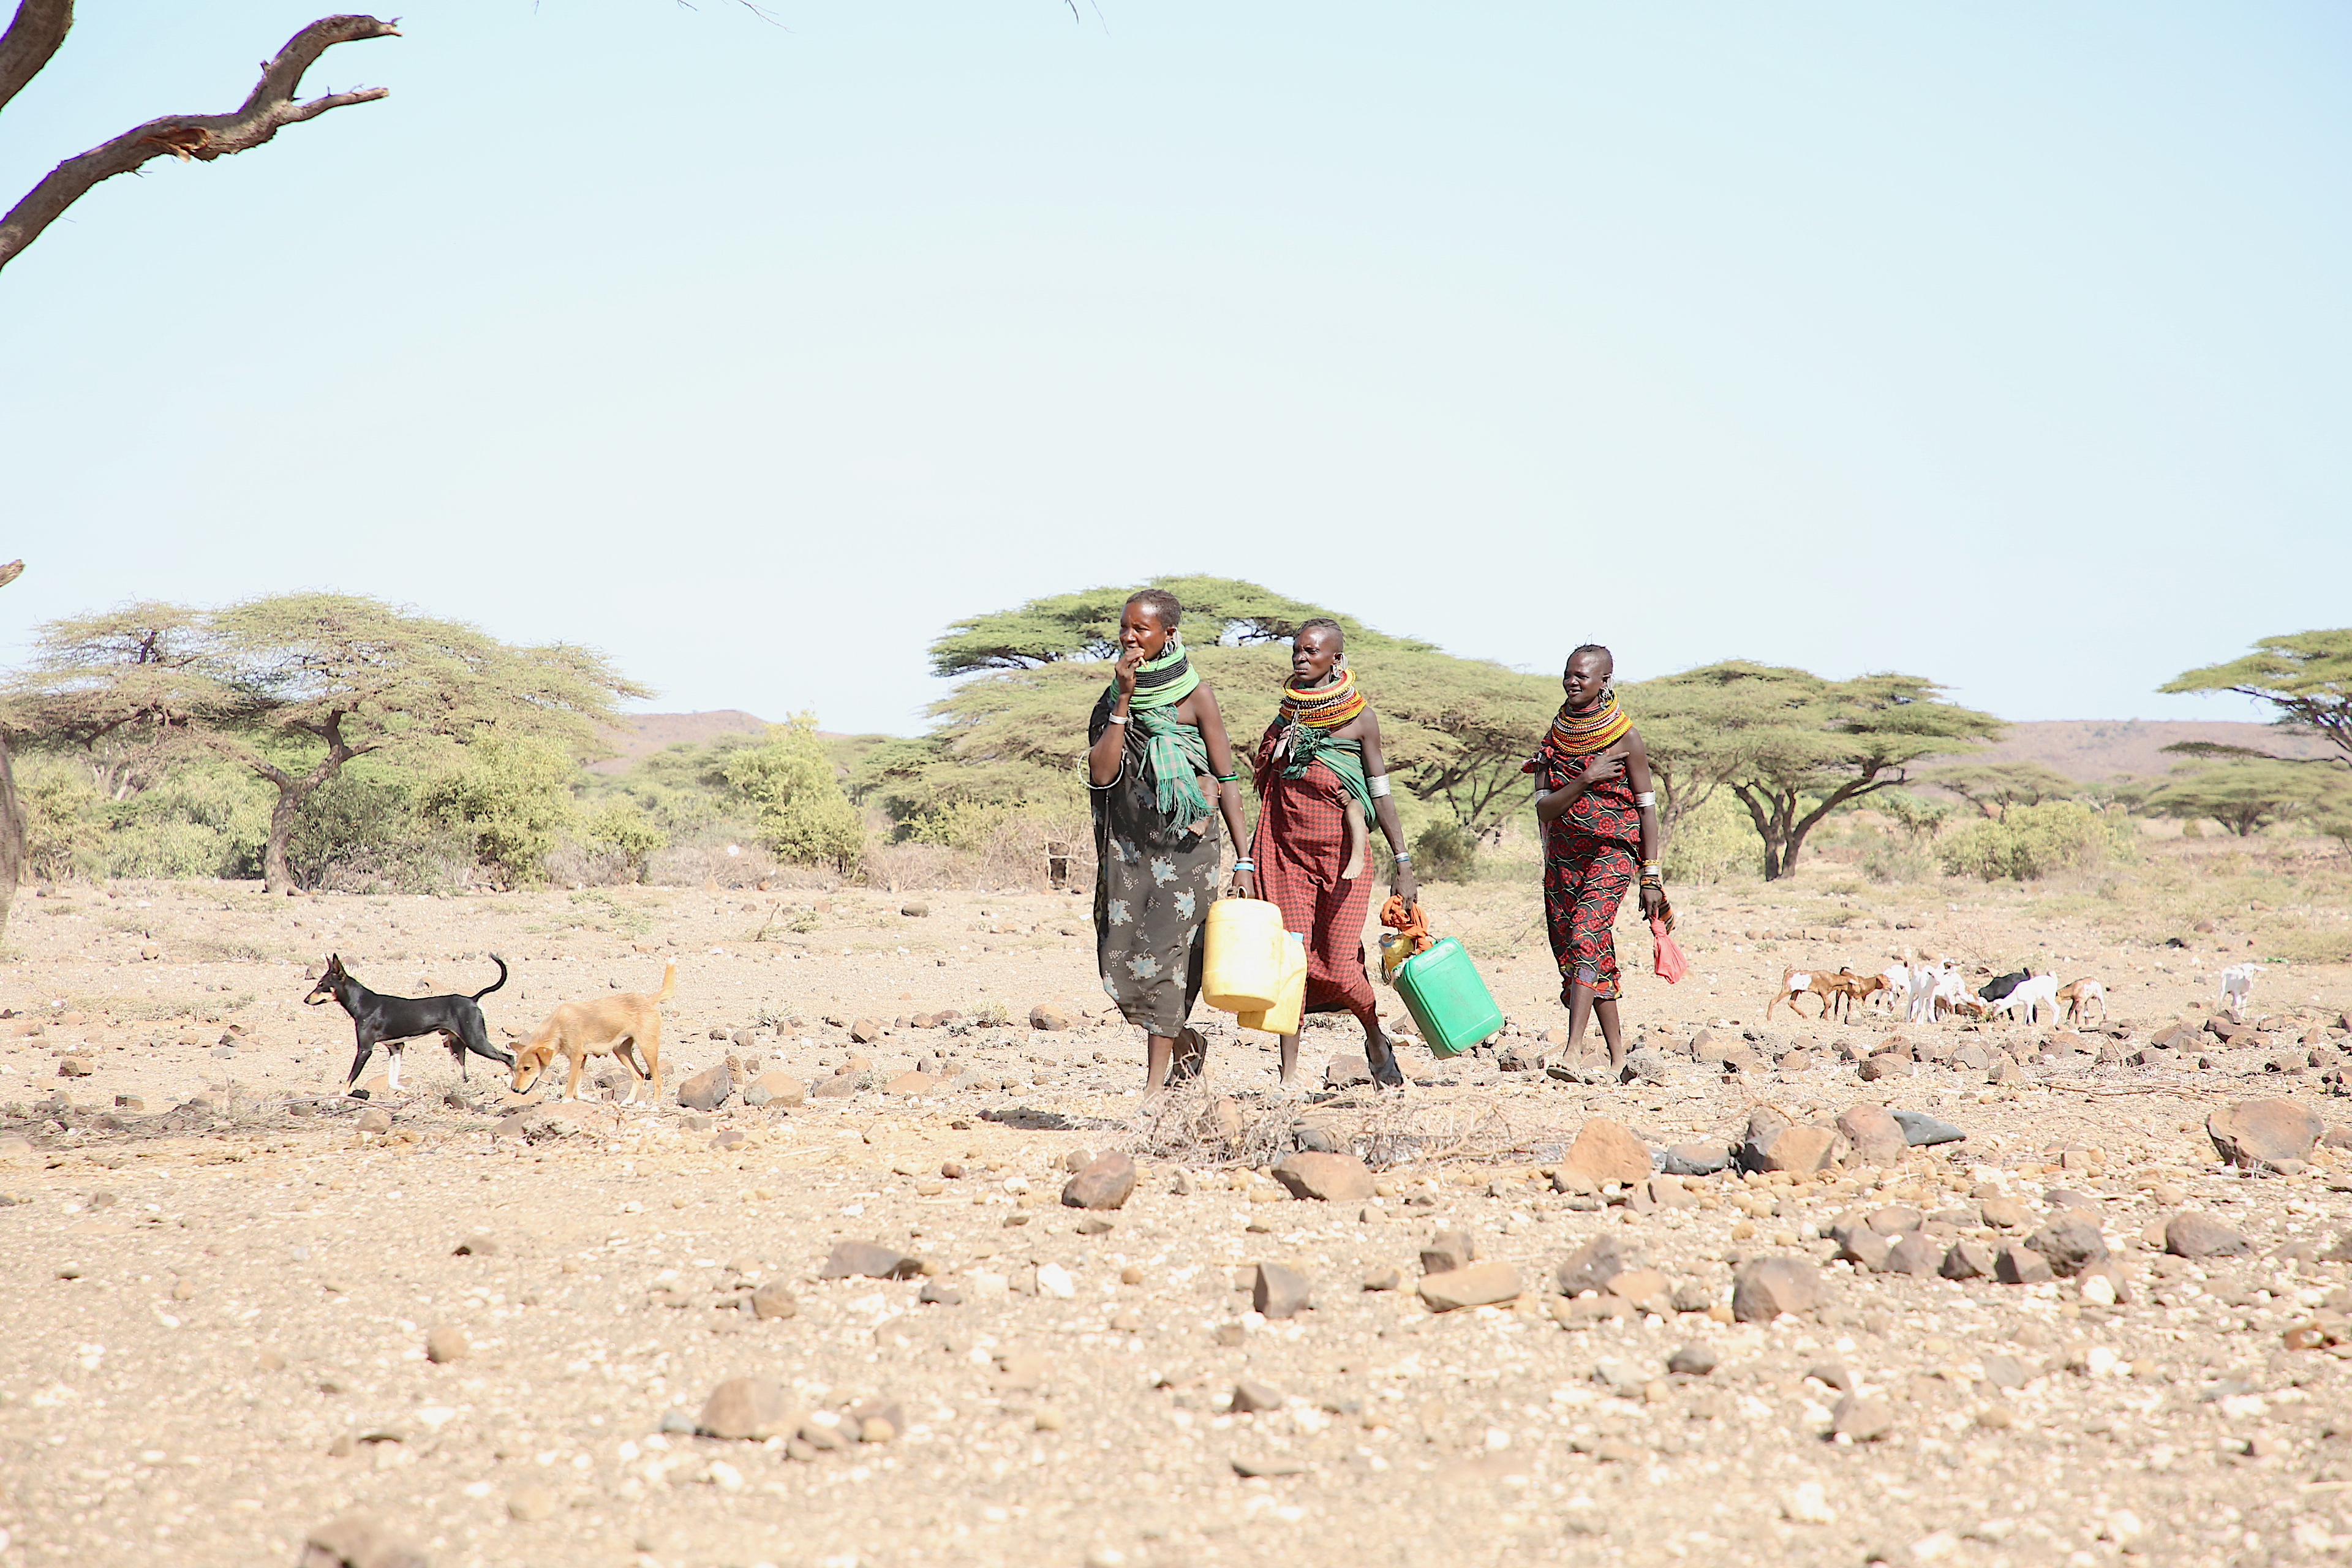 Three women from Kenya walking in the desert with their dog, while carrying water tubs.